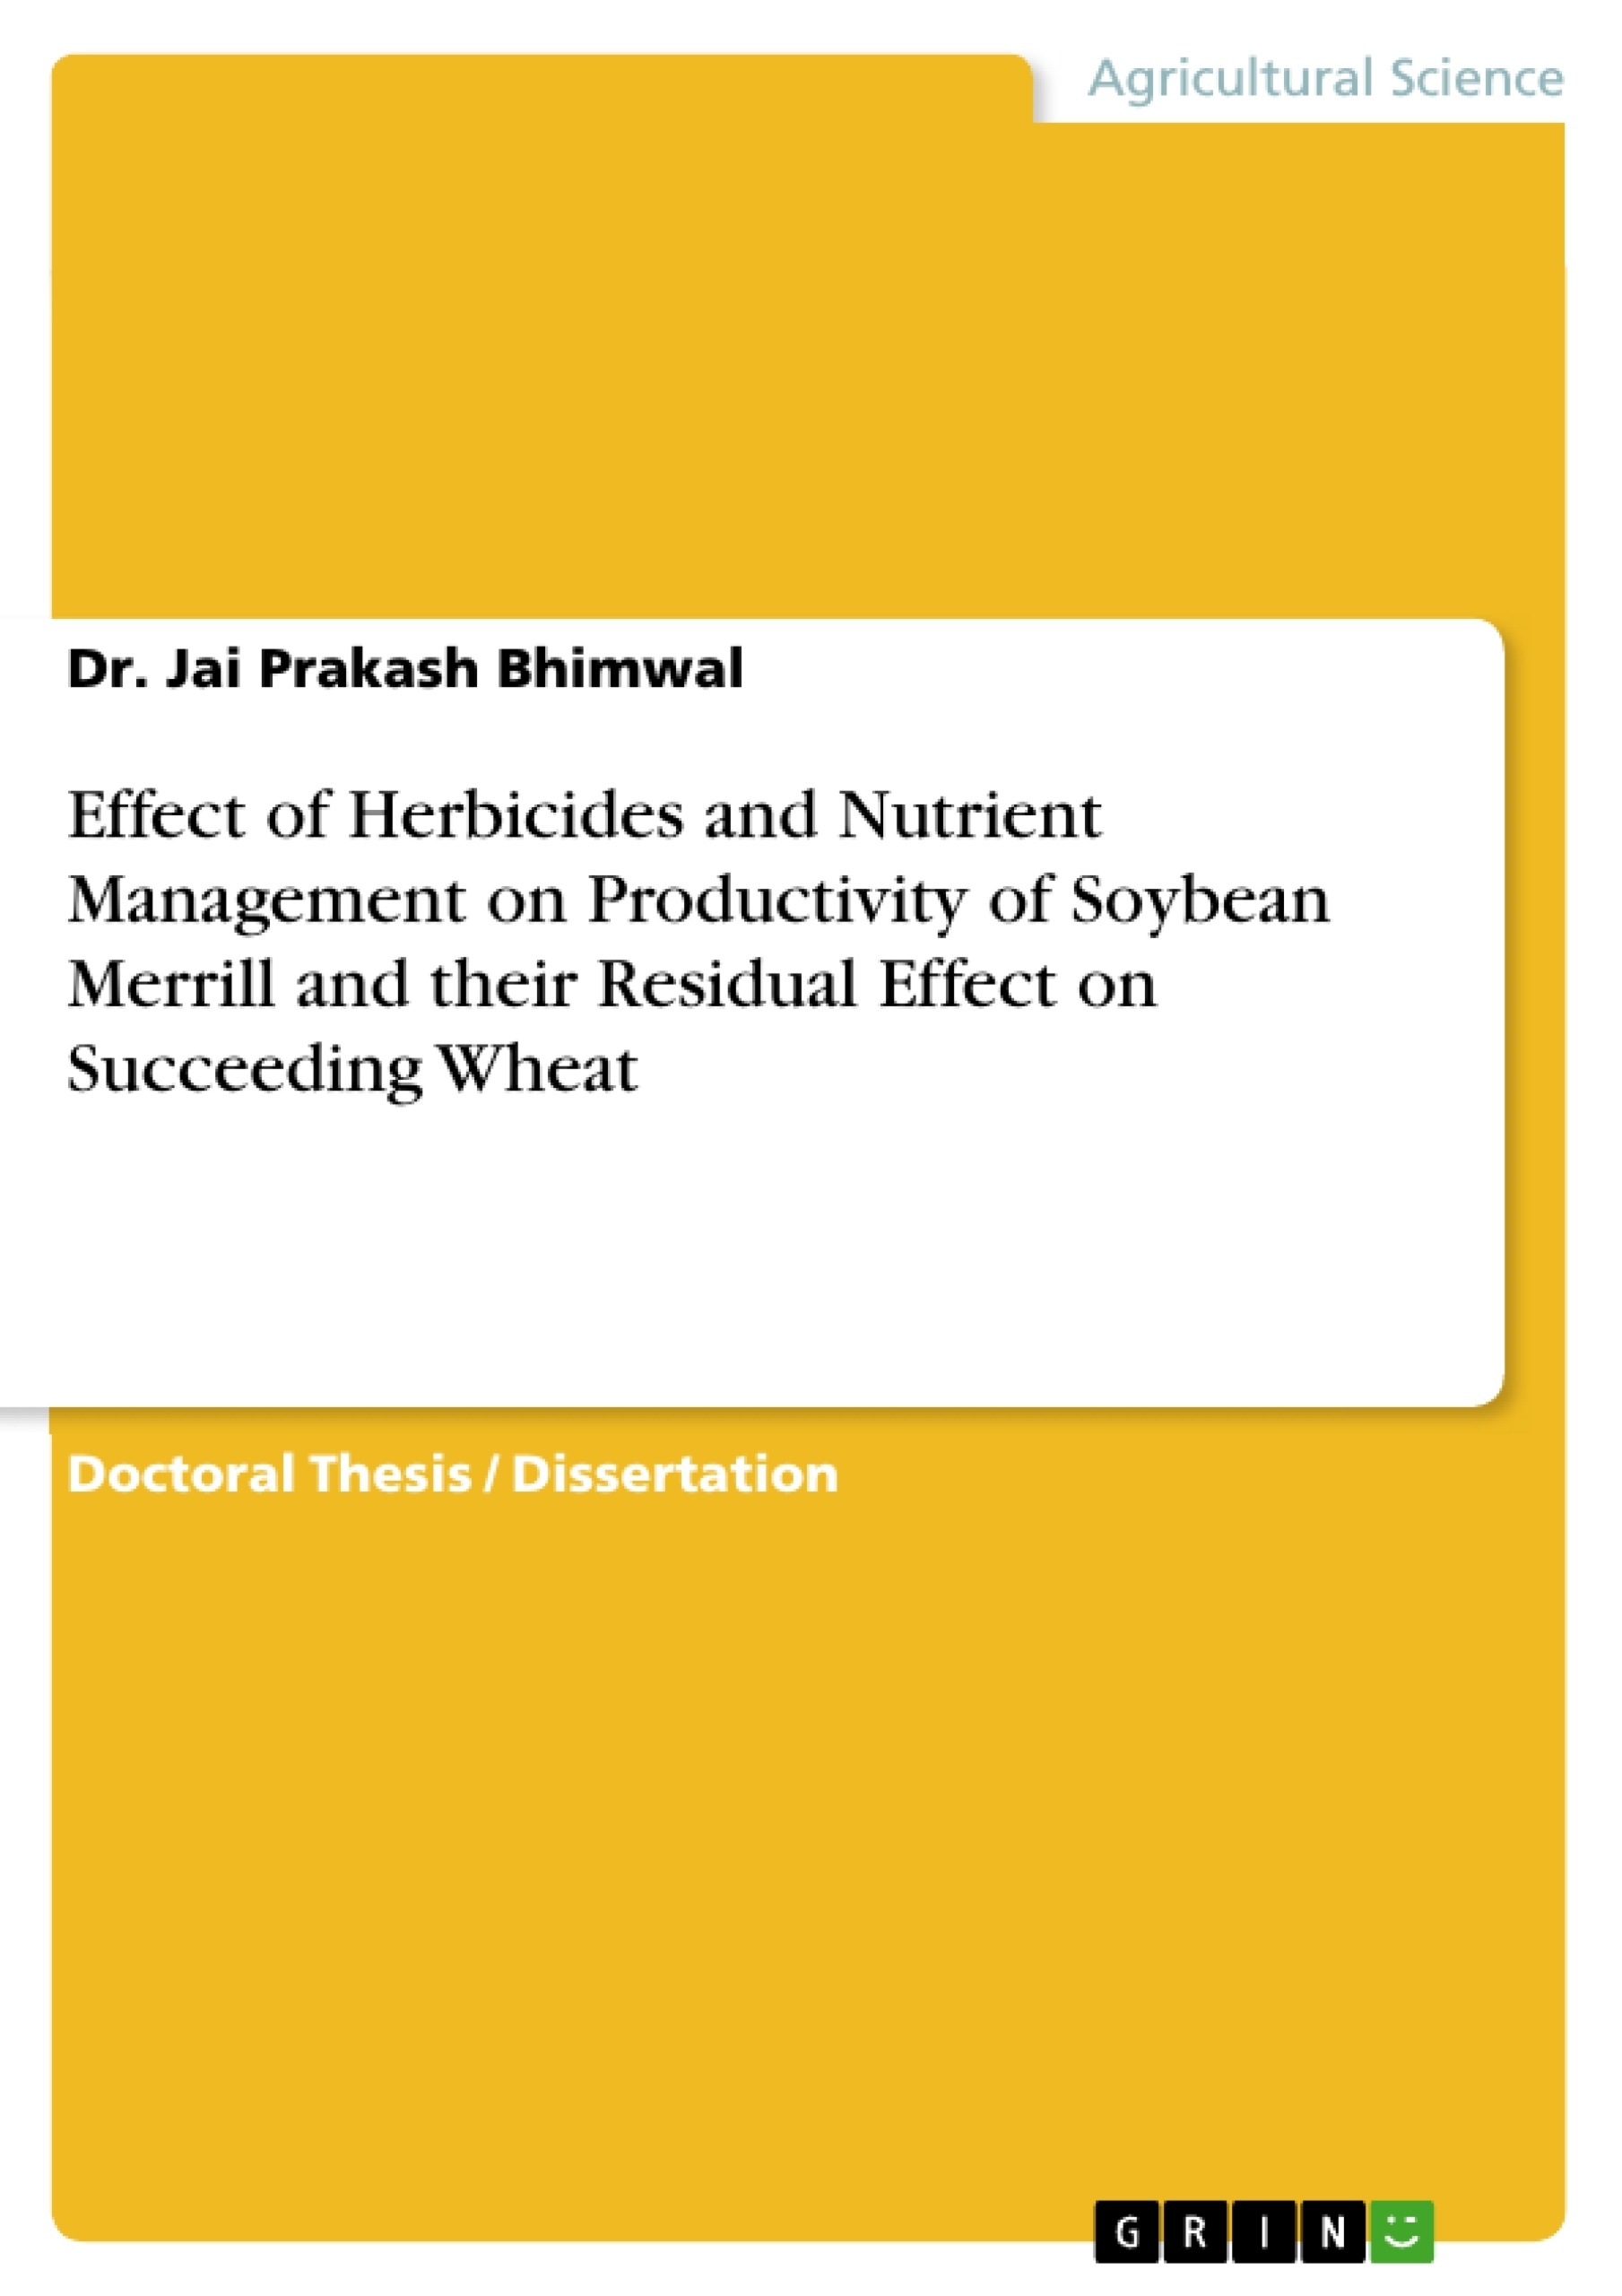 Titre: Effect of Herbicides and Nutrient Management on Productivity of Soybean Merrill and their Residual Effect on Succeeding Wheat